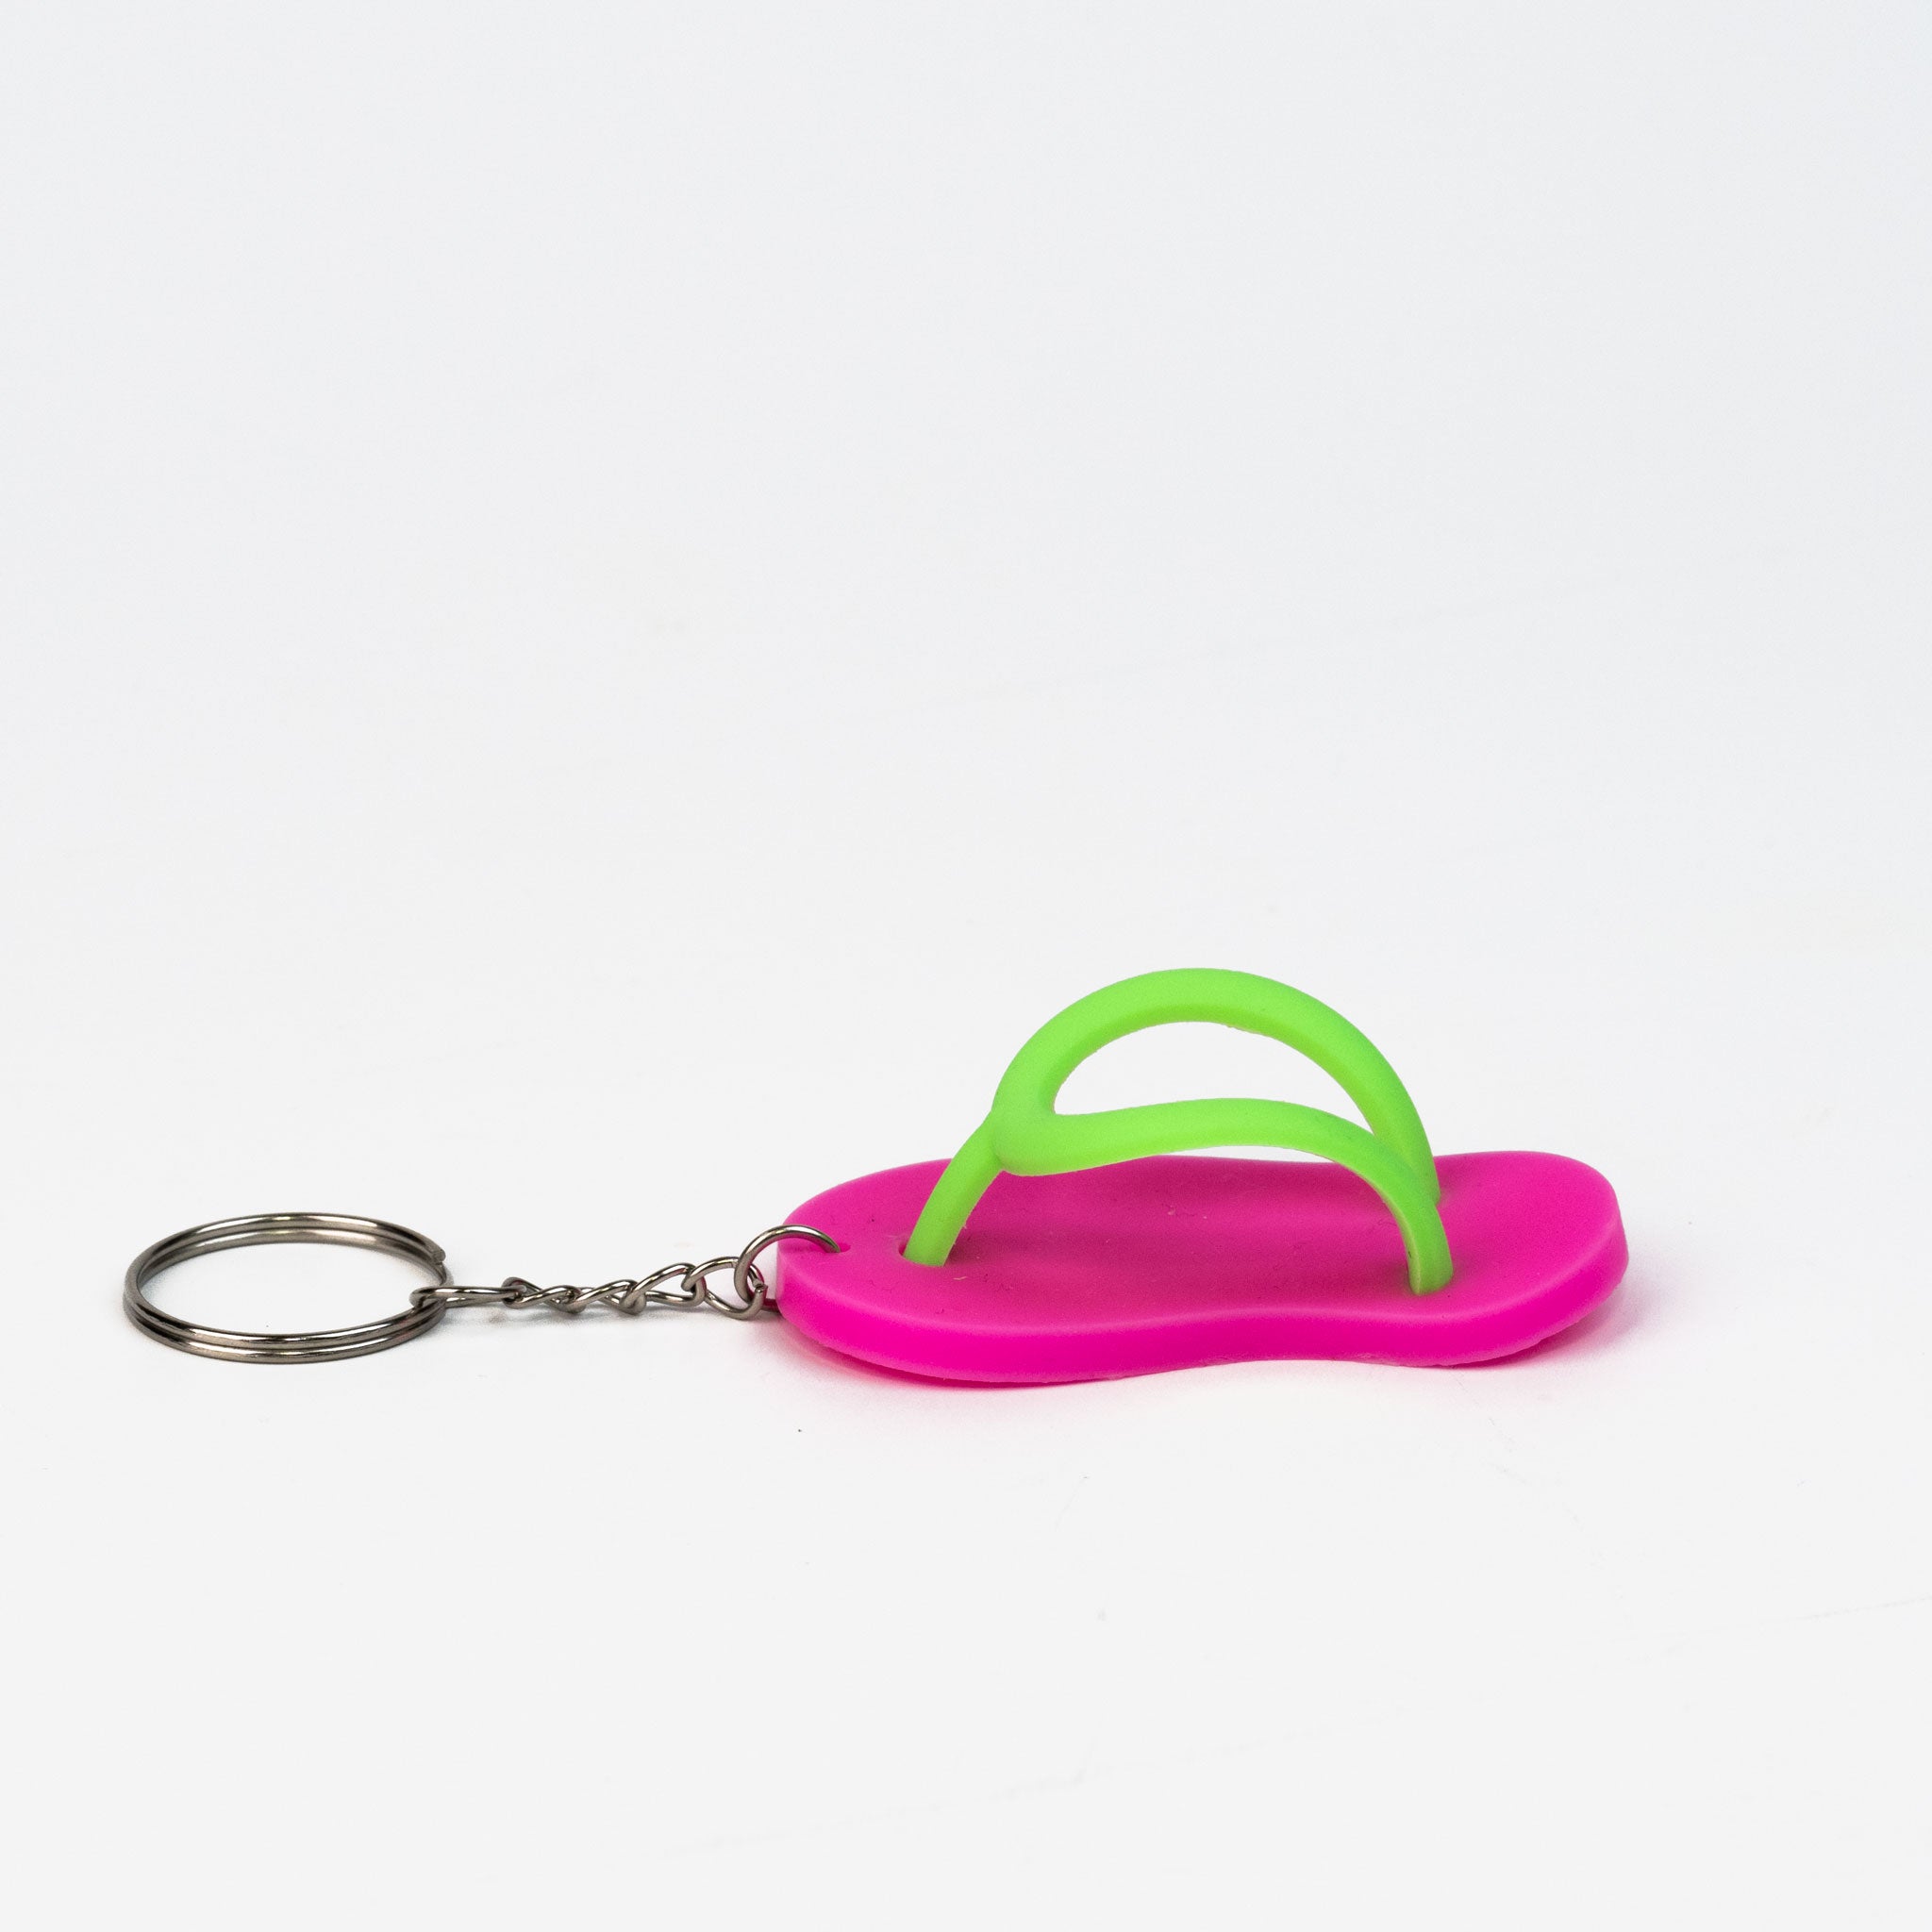 Sunny Steps Silicone Flip Flop Keychain Accessory Wholesale